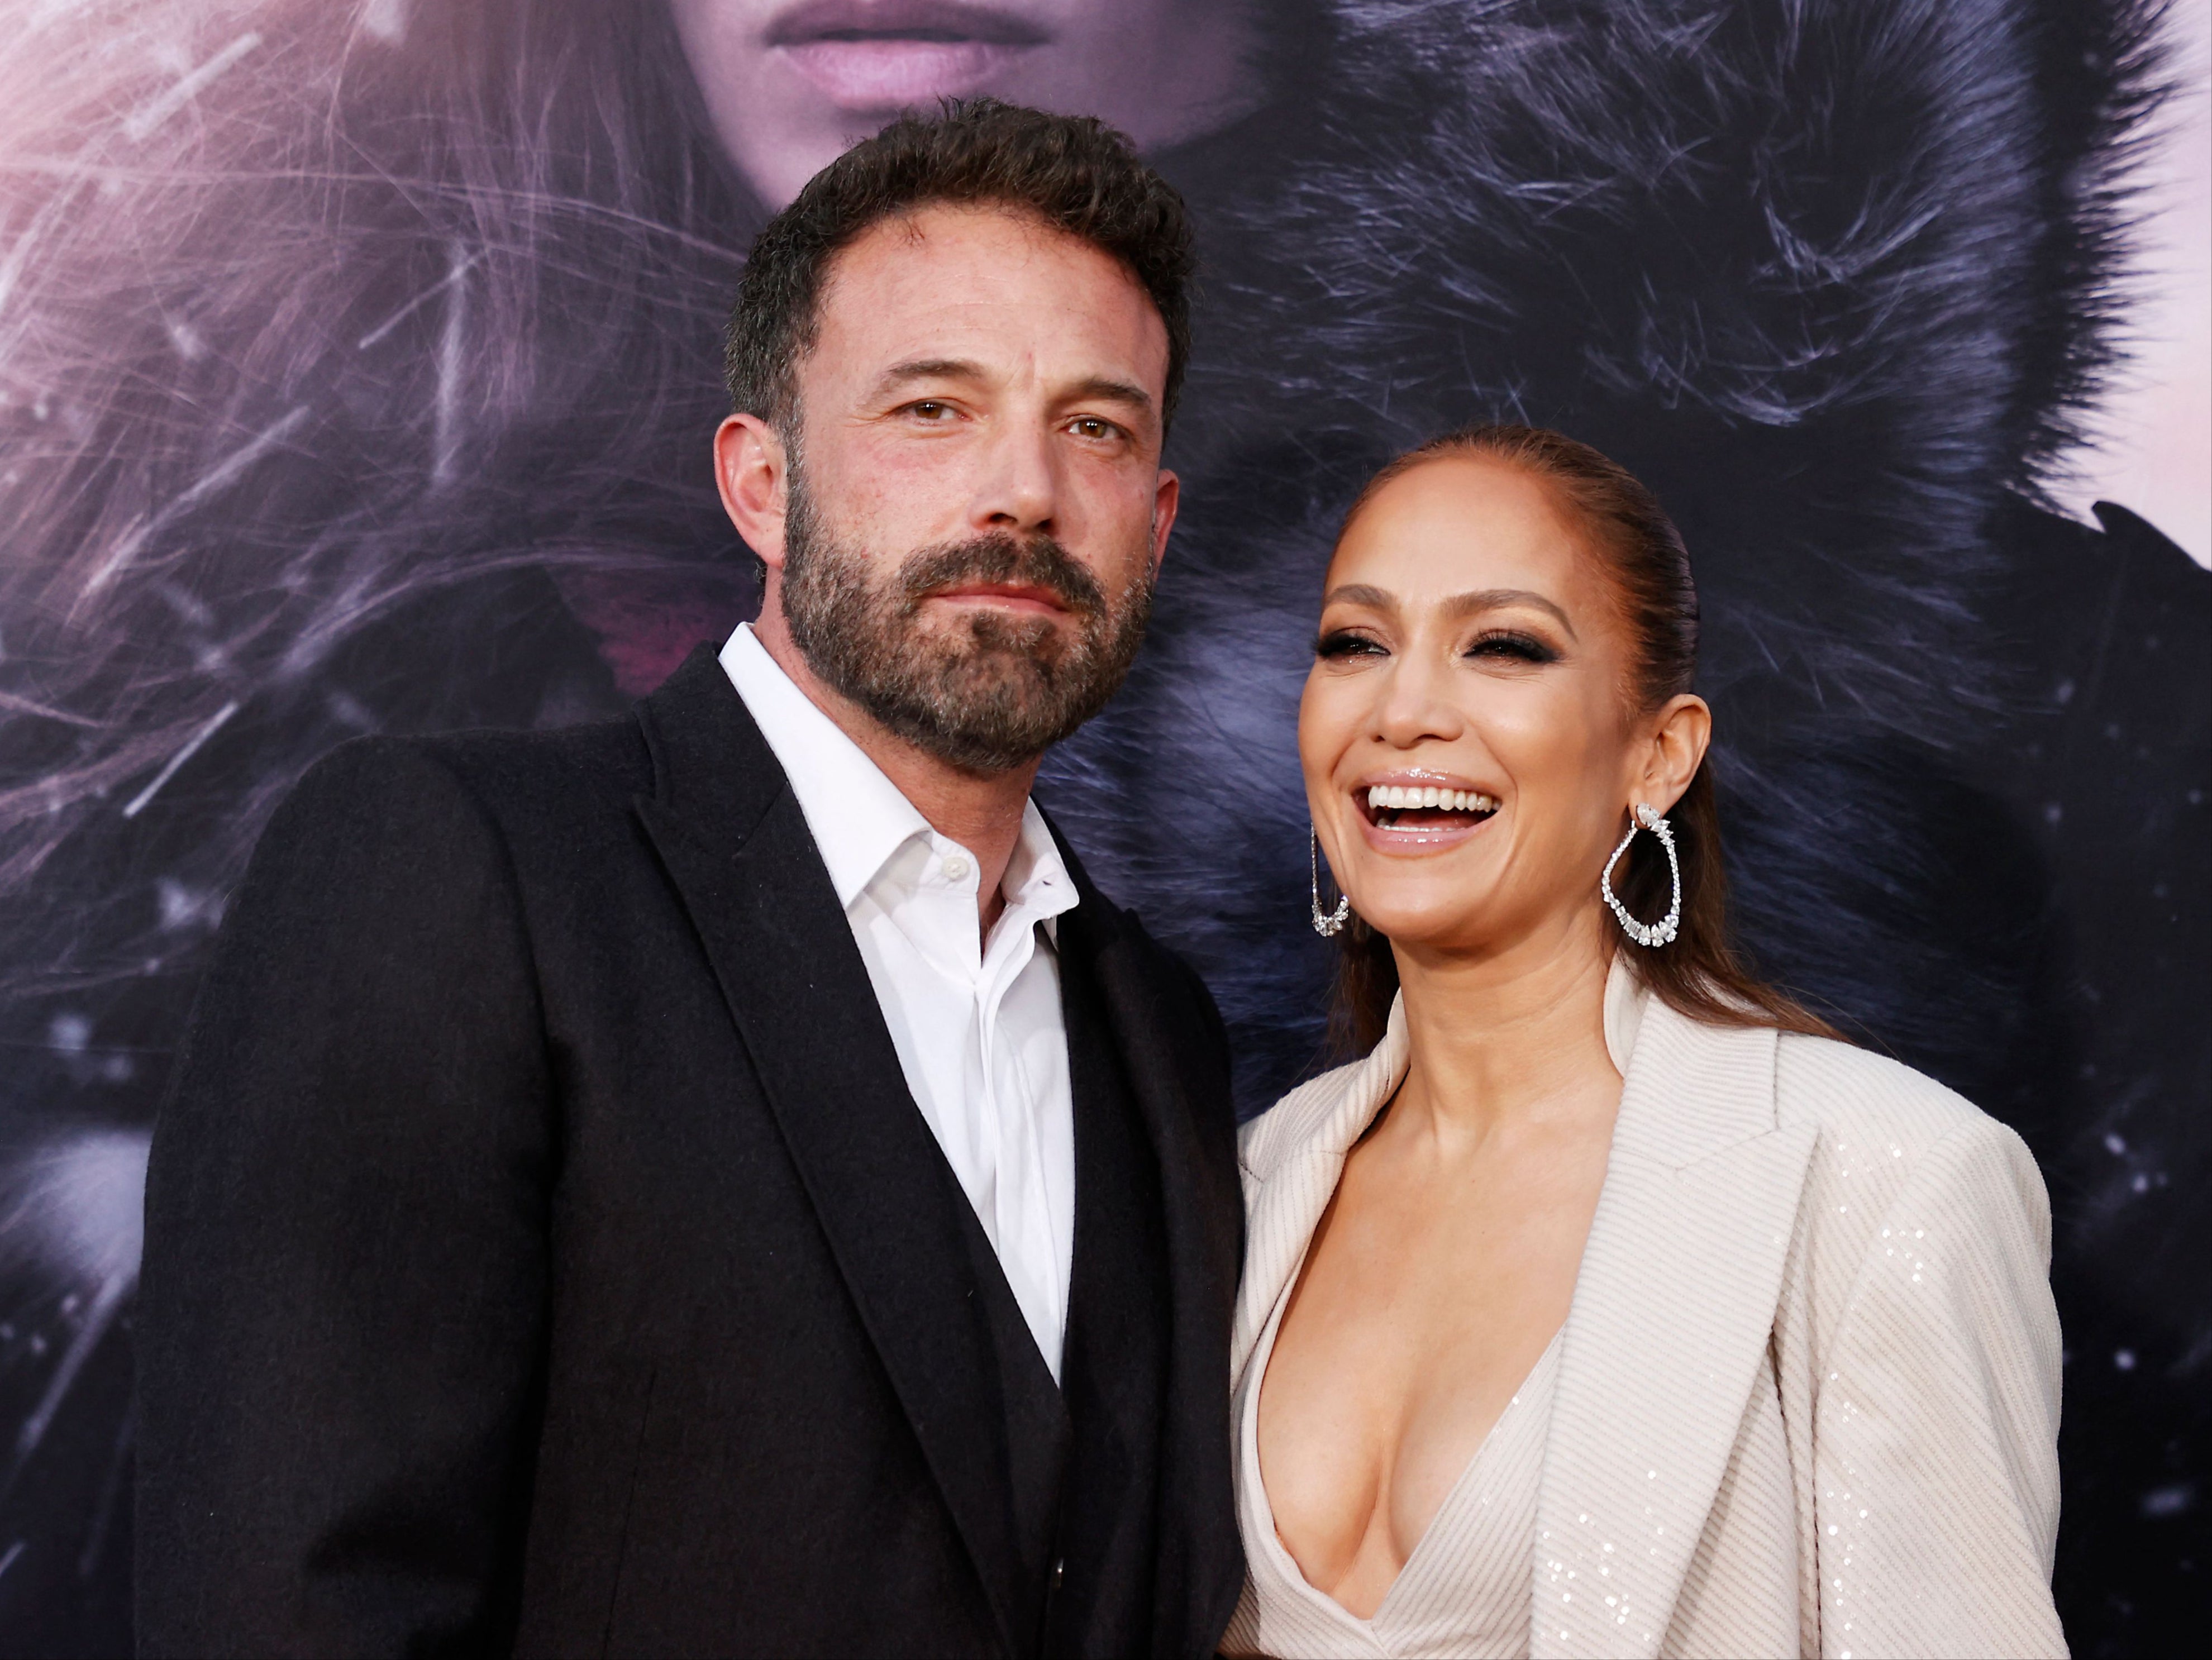 Multiple reports have claimed Jennifer Lopez and Ben Affleck are experiencing ‘issues’ in their marriage